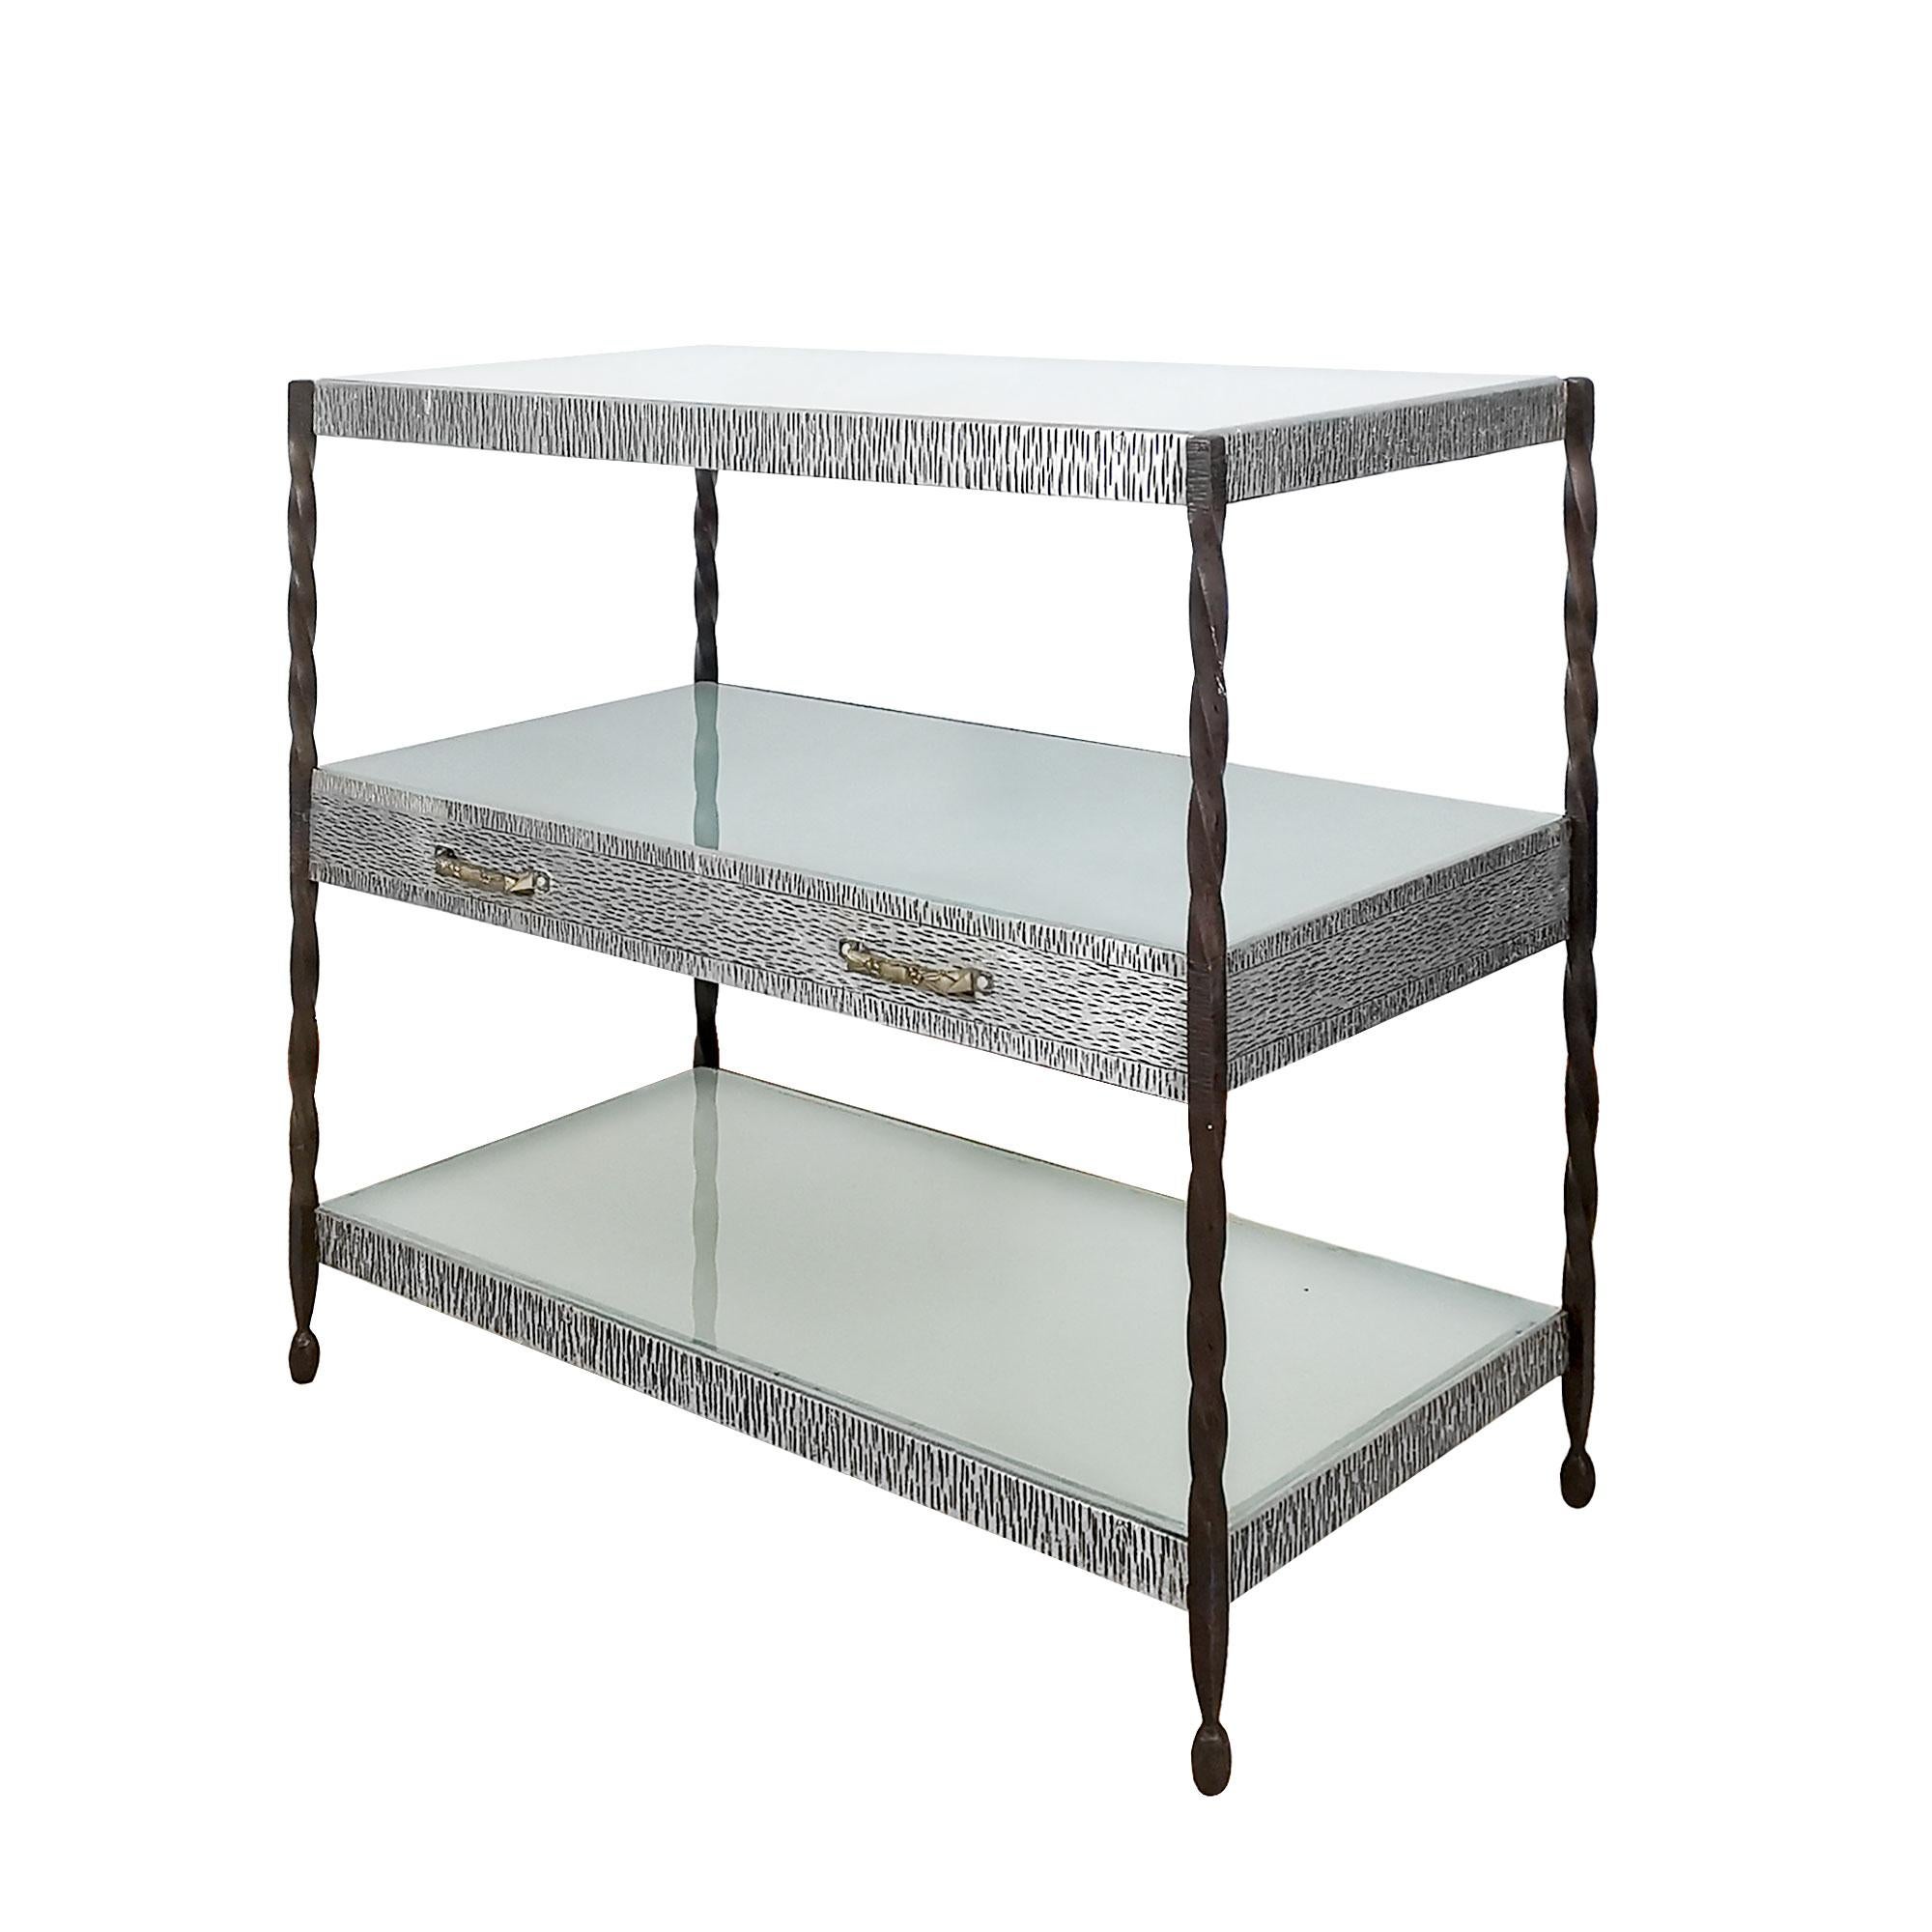 Center shelving unit, wrought iron and three metal plates with drypoint engraving in three levels. One drawer and three sandblast glasses, solid brass handles.

France, c. 1920.